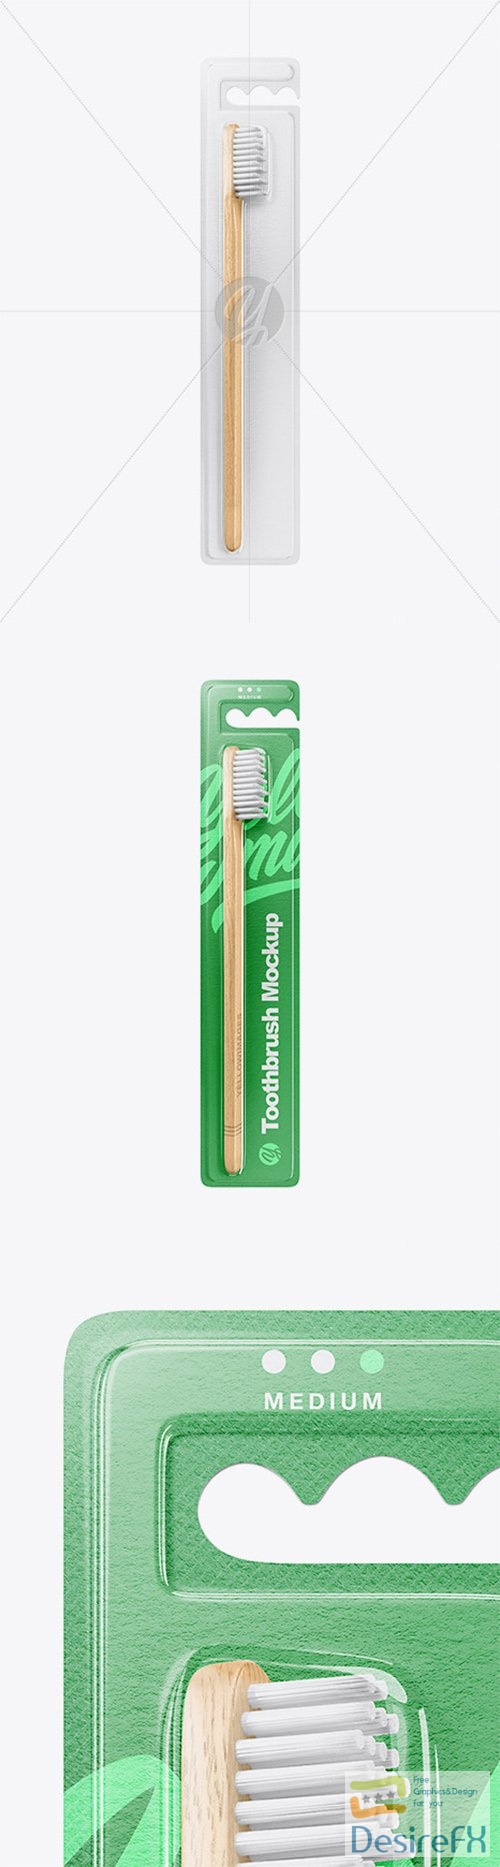 Blister Pack with Wooden Toothbrush Mockup 79245 TIF